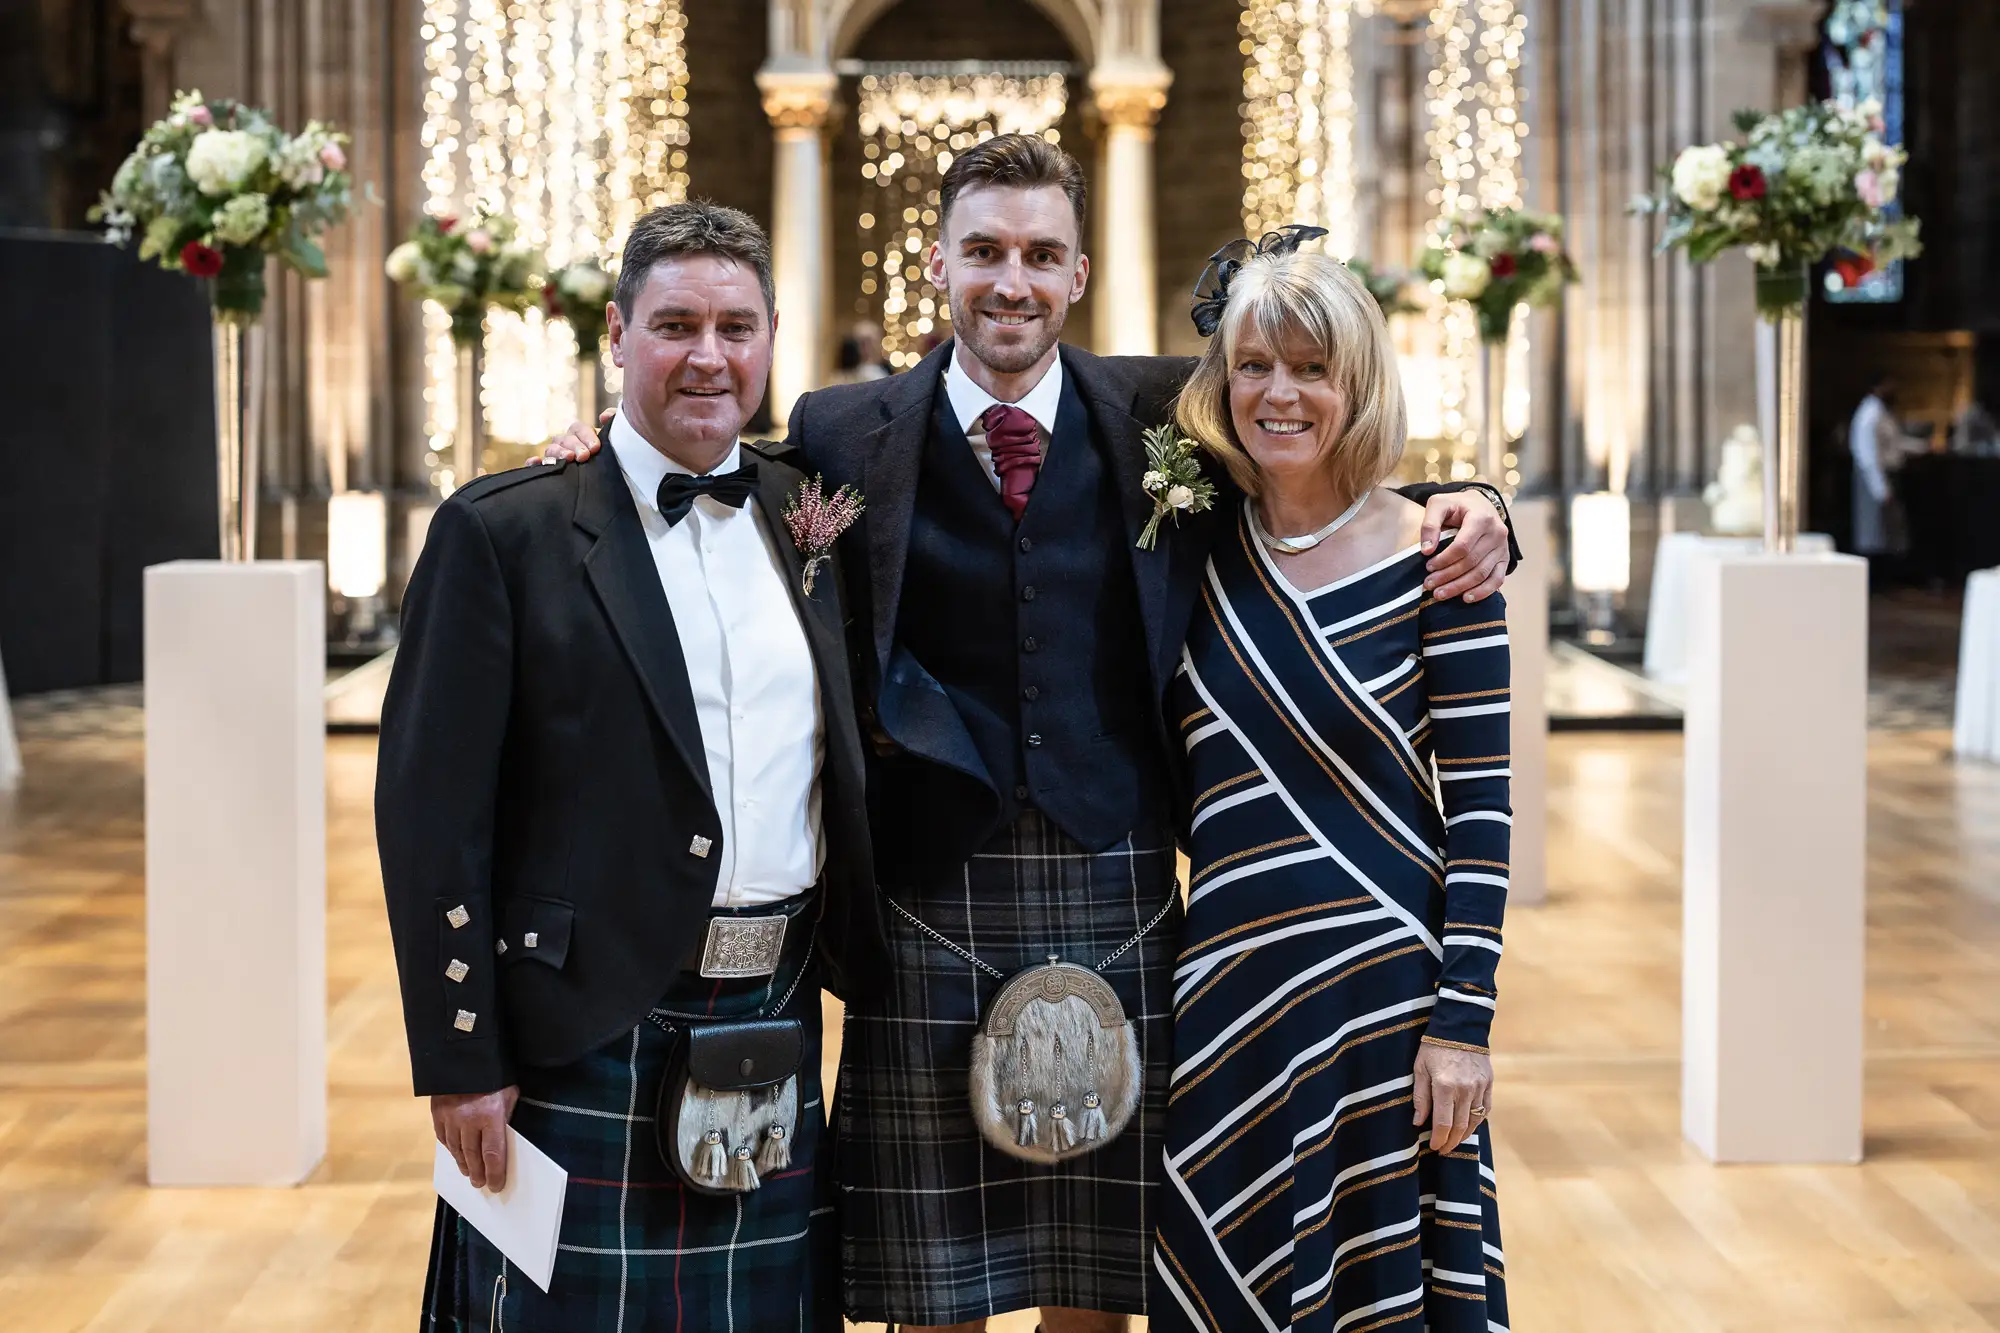 Three people in formal attire pose in a cathedral; two men in kilts flank a woman in a striped dress, all smiling.